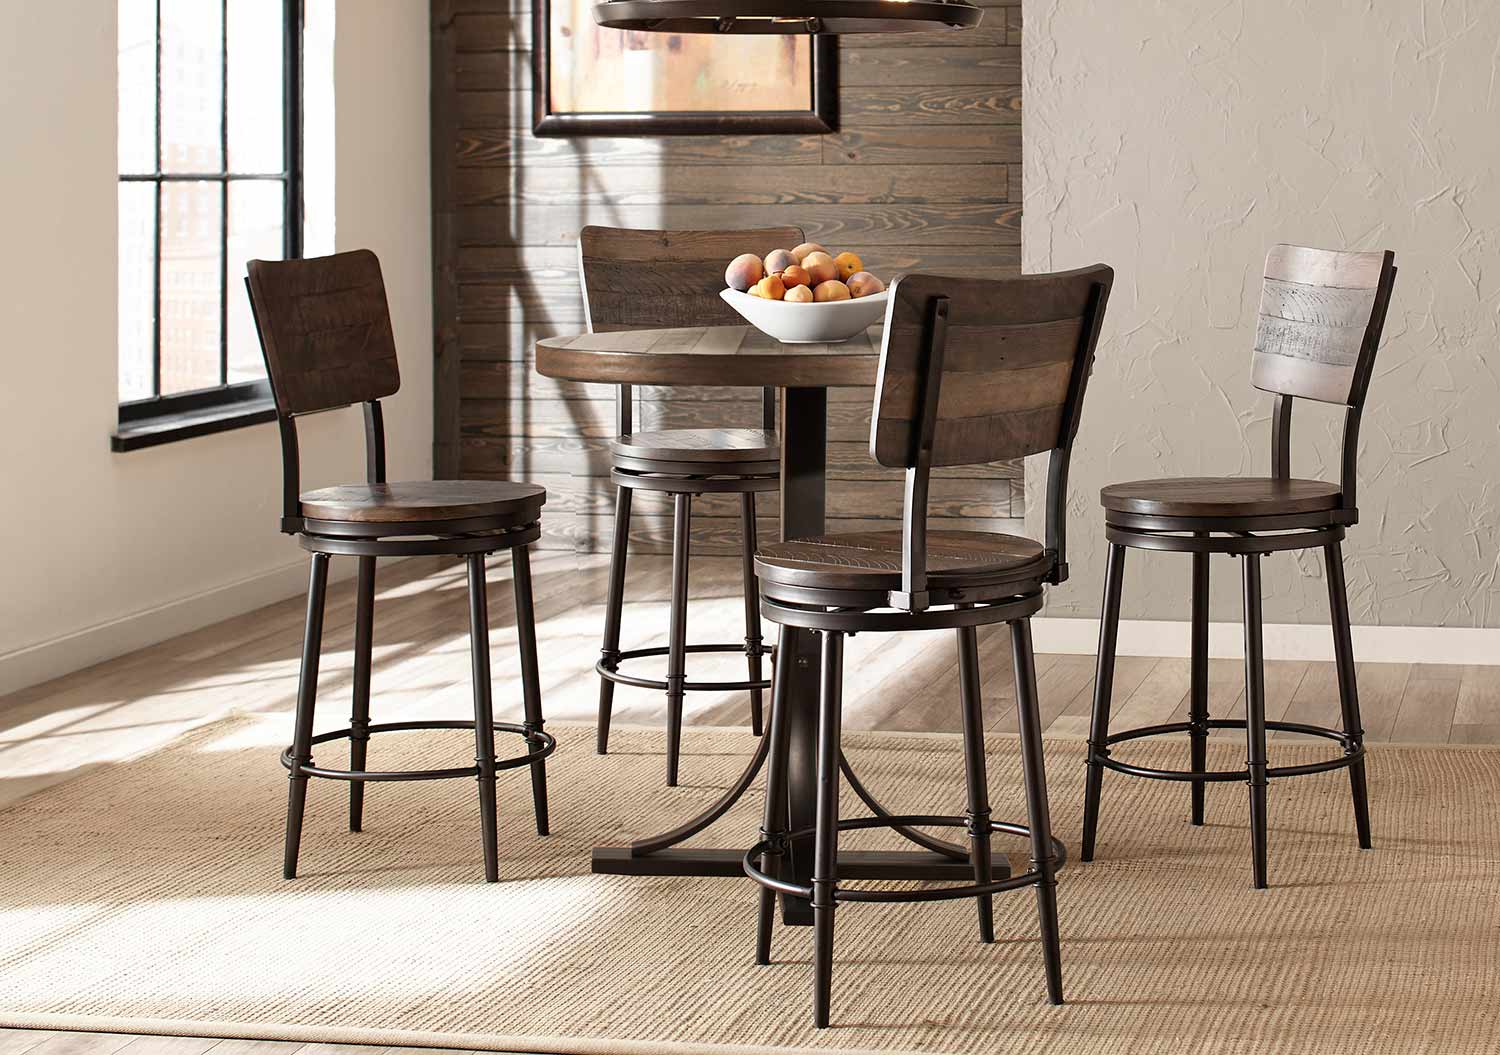 Hillsdale Jennings 5 Piece Counter Height Dining Set with Swivel Counter Height Stools - Walnut Wood/Brown Metal